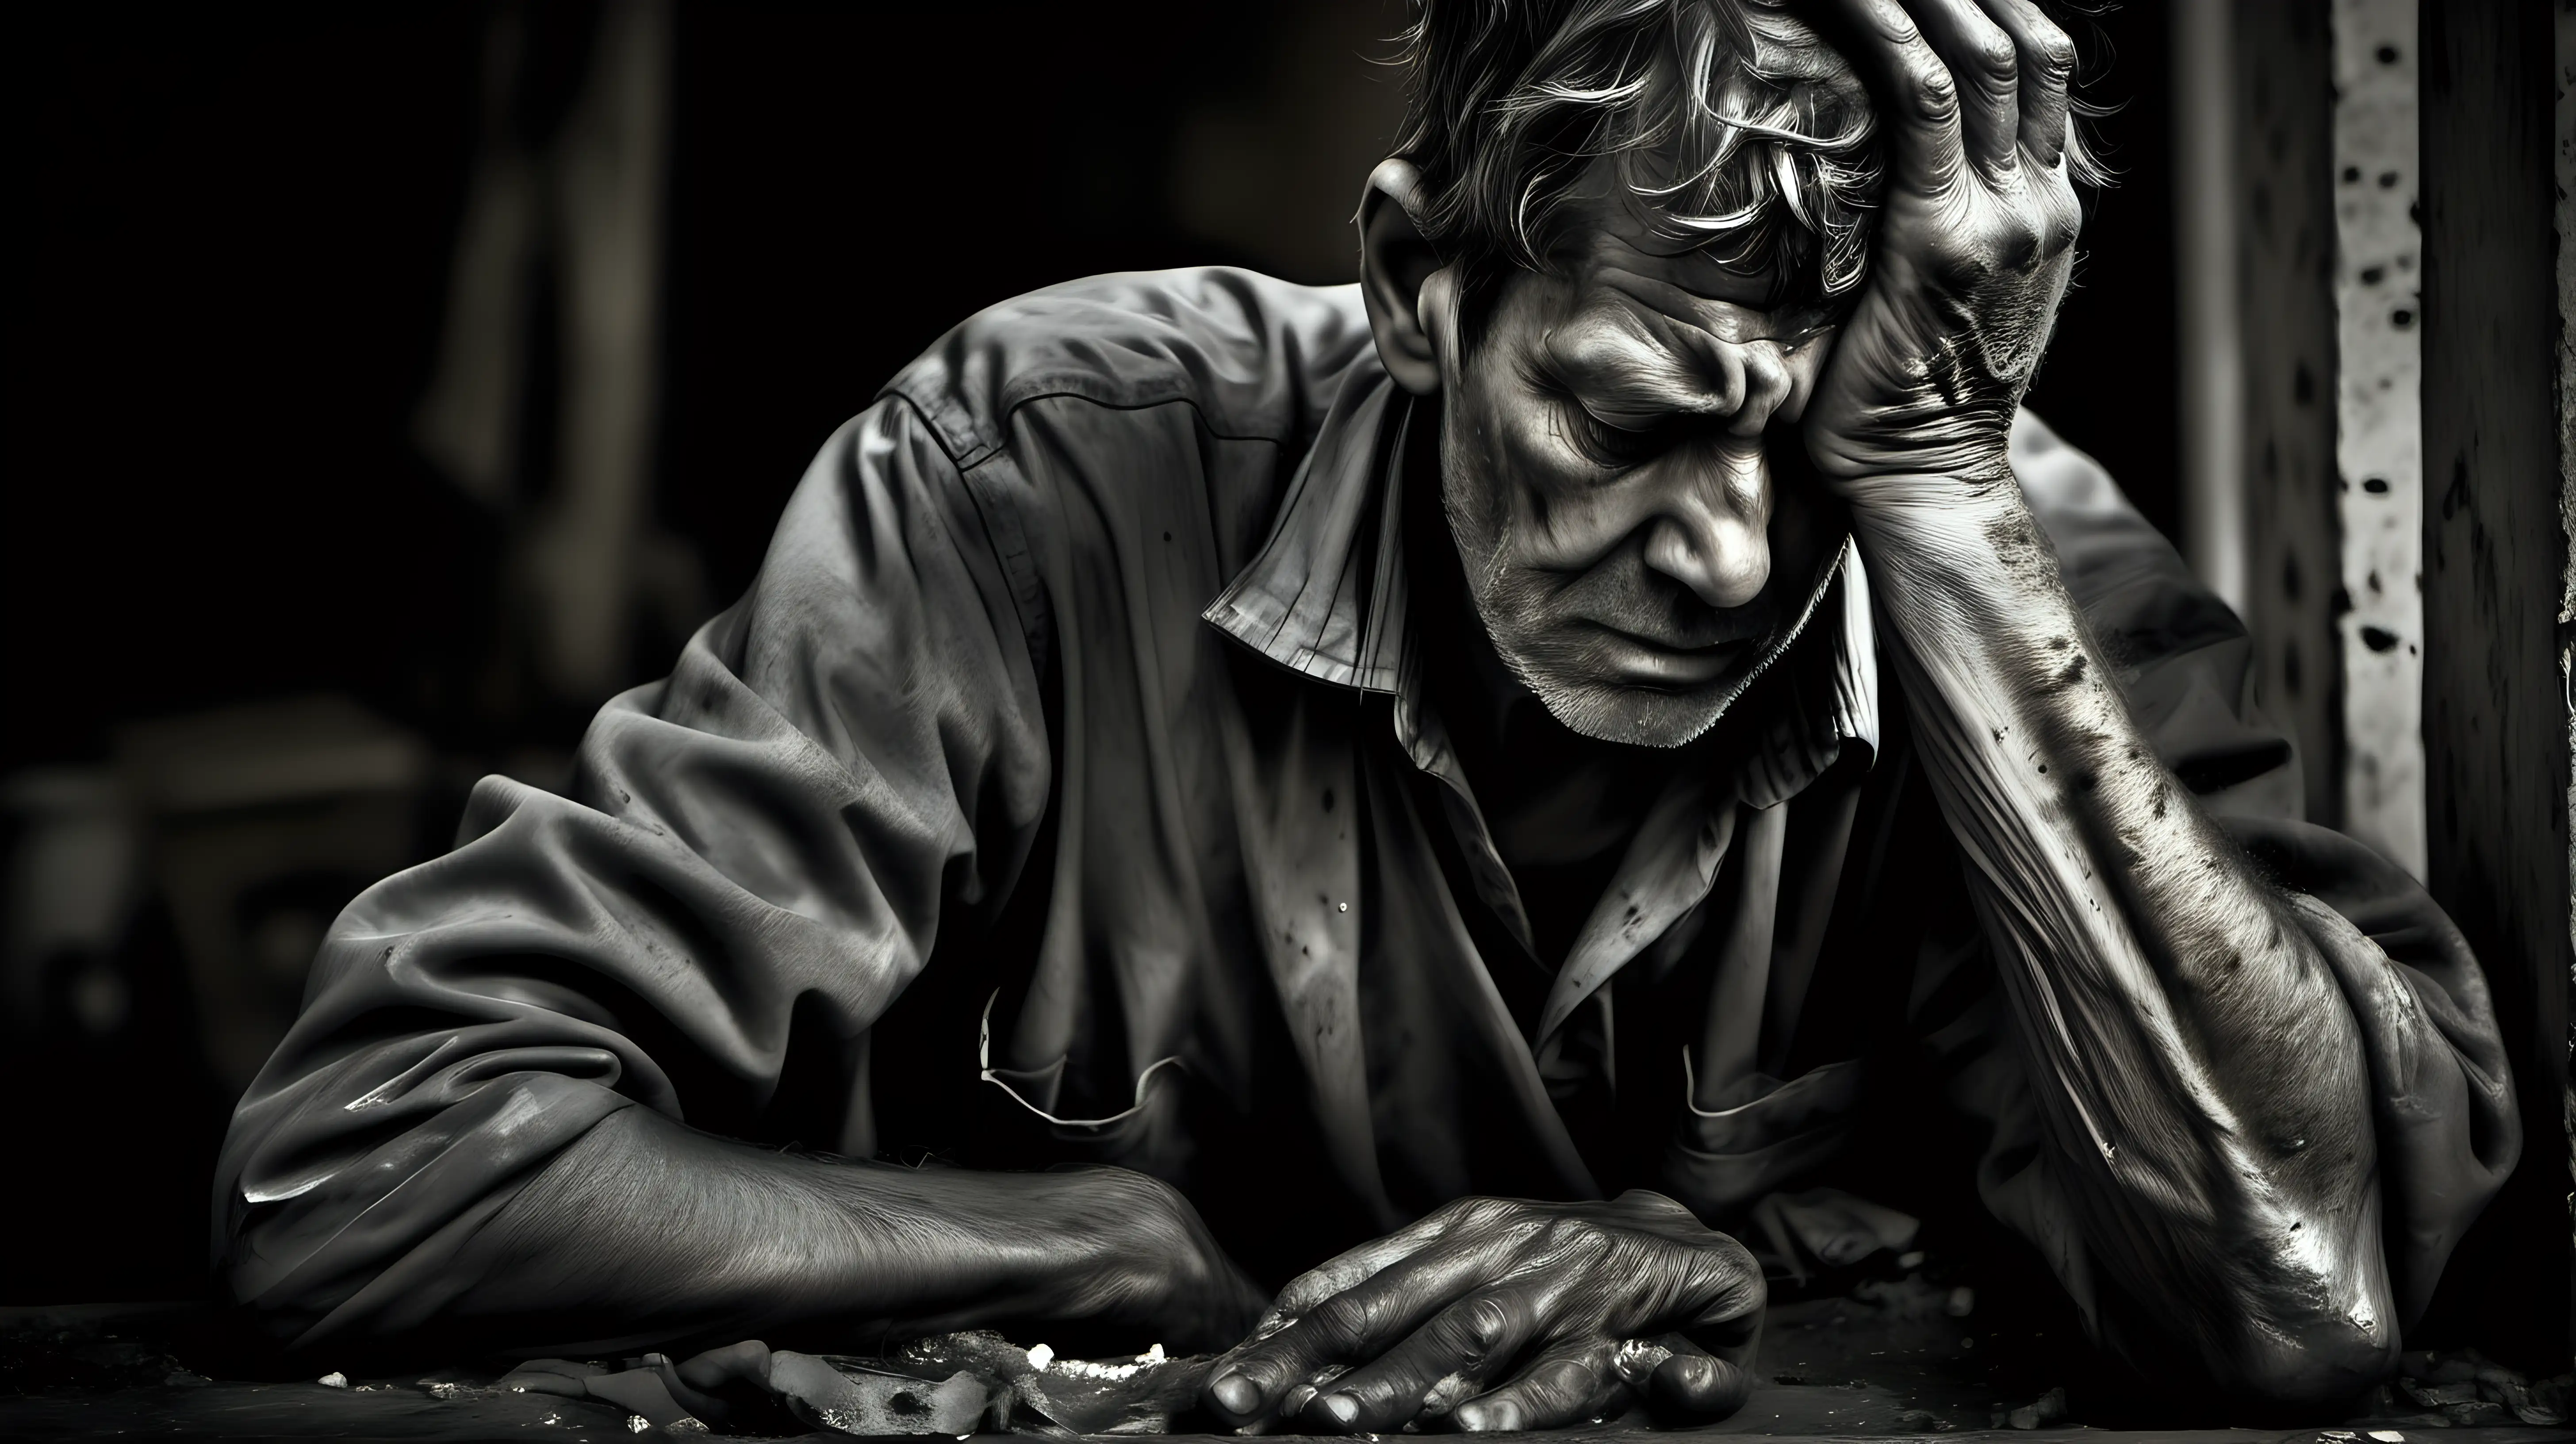 Showcase the intensity of a person laboring in a challenging environment, their worn-out expression and weary posture reflecting the physical and mental toll of their efforts.